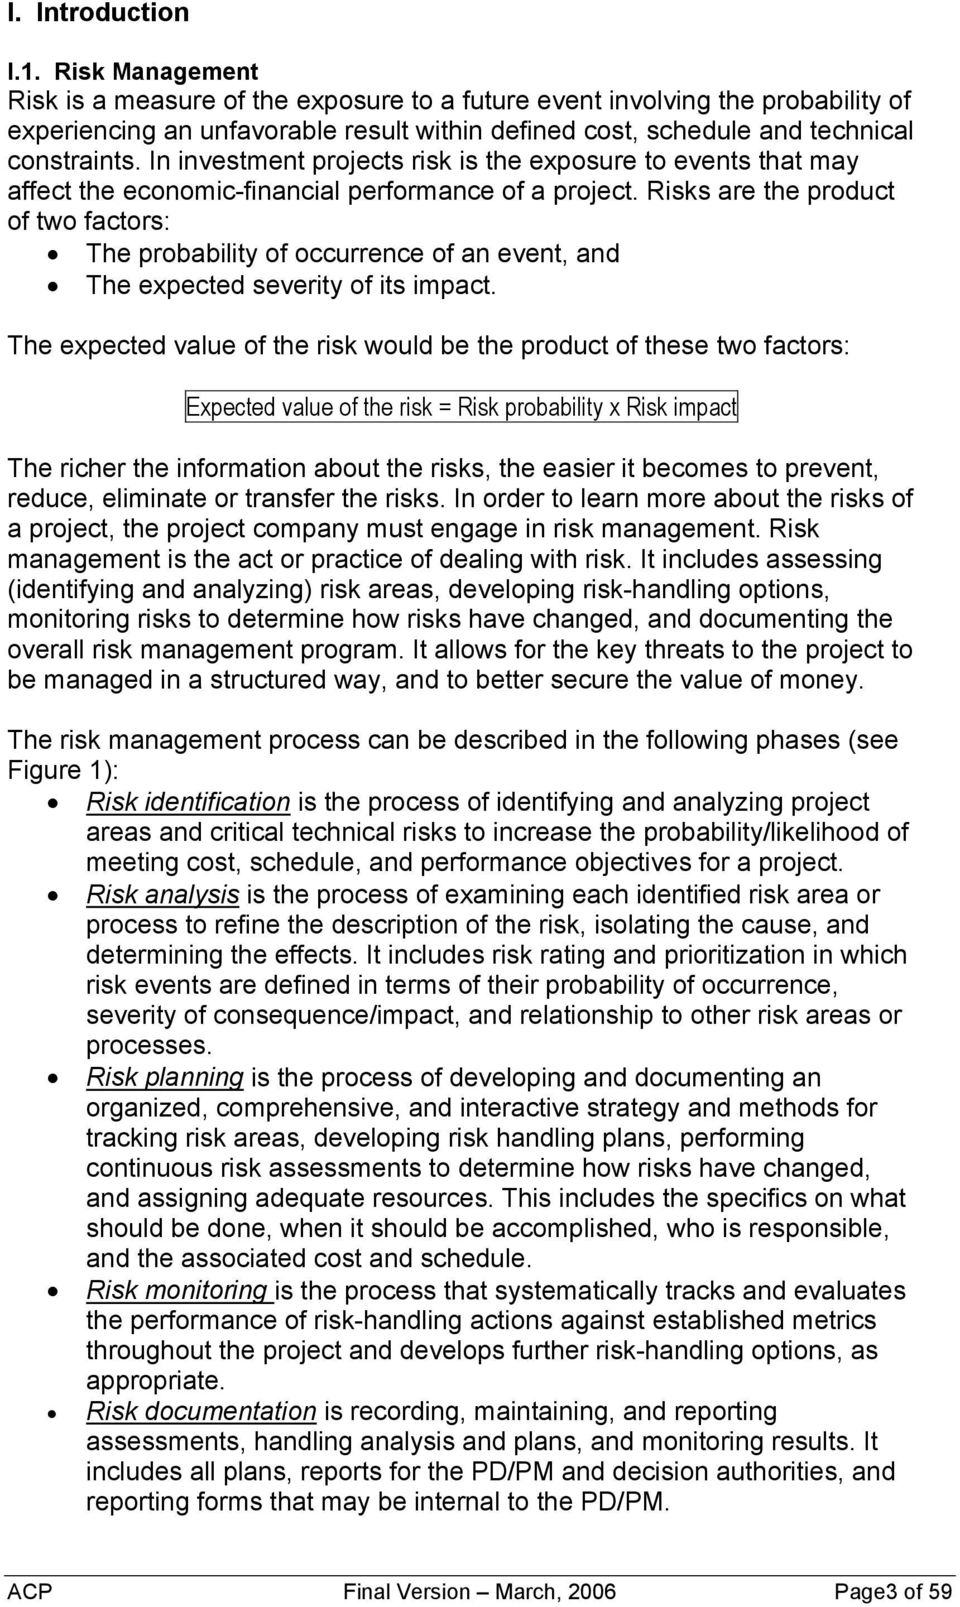 In investment projects risk is the exposure to events that may affect the economic-financial performance of a project.